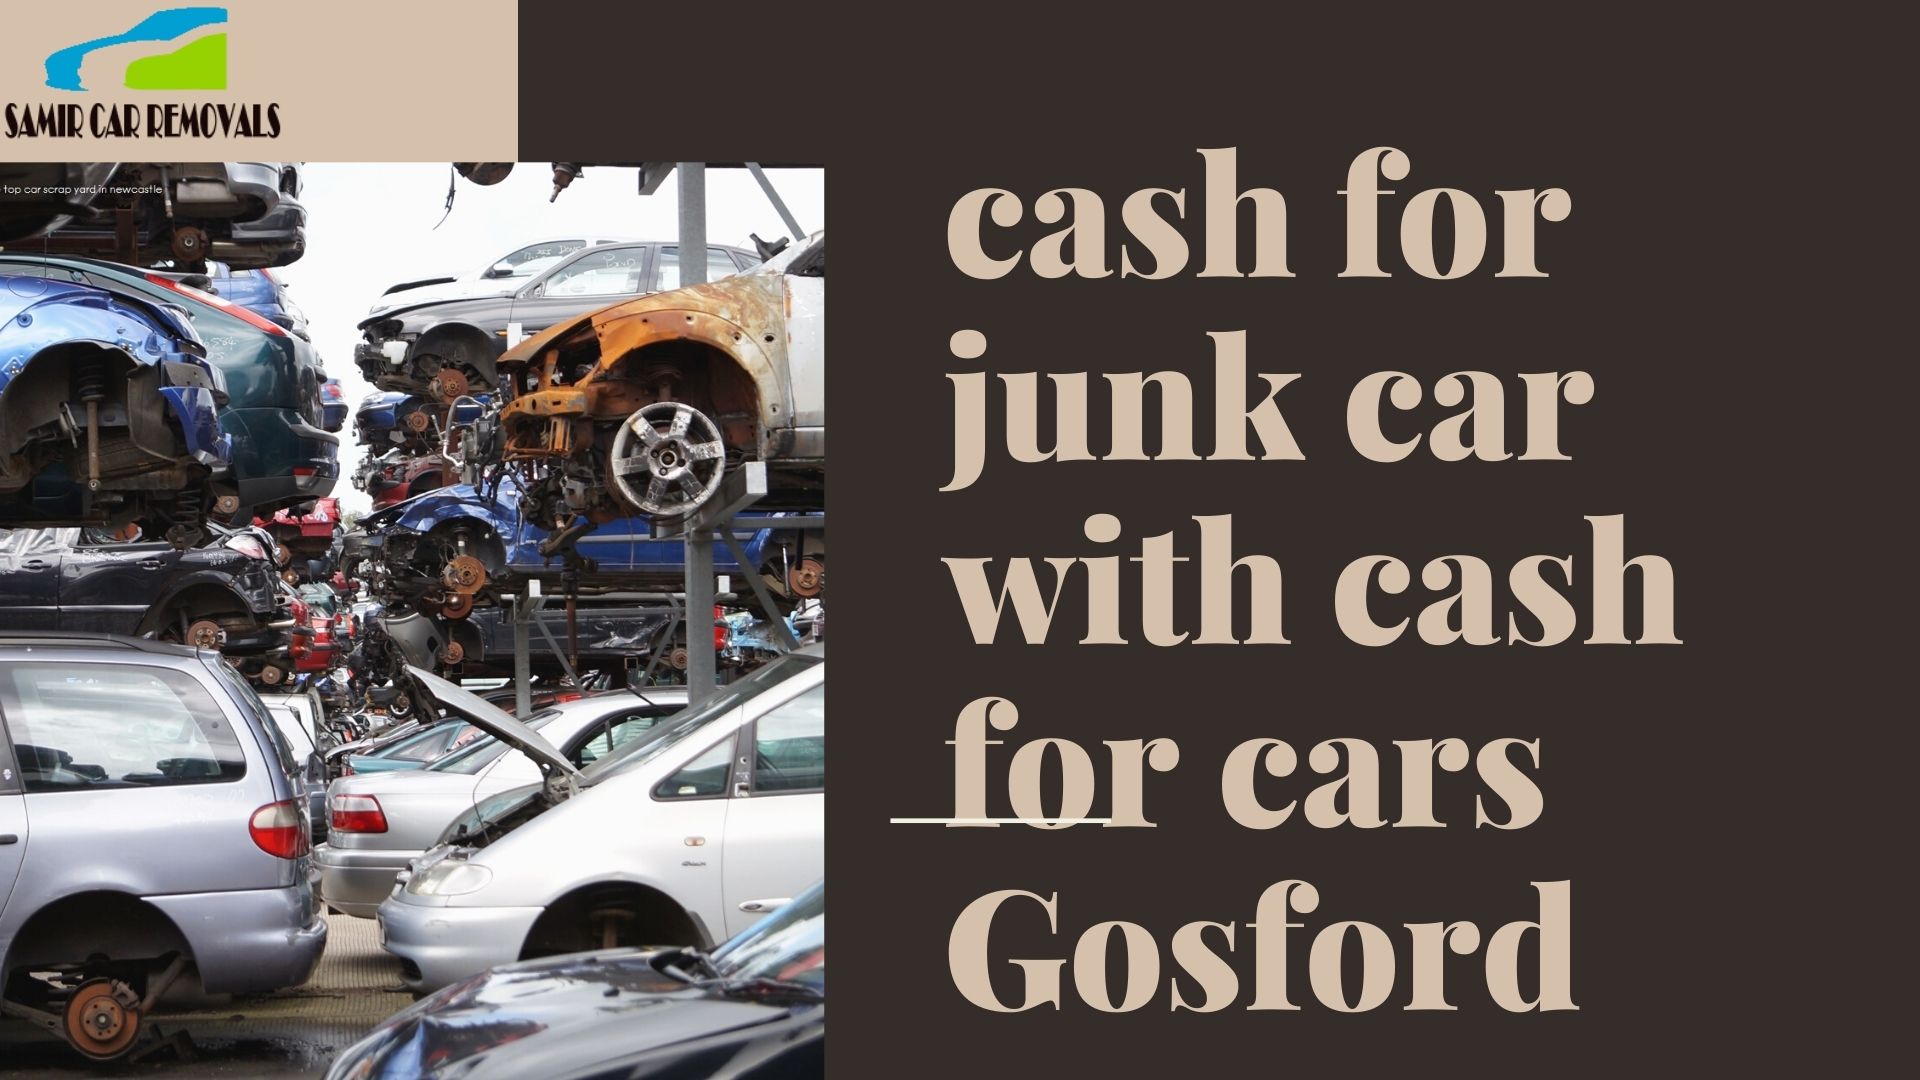 Get cash for junk car with cash for cars Gosford